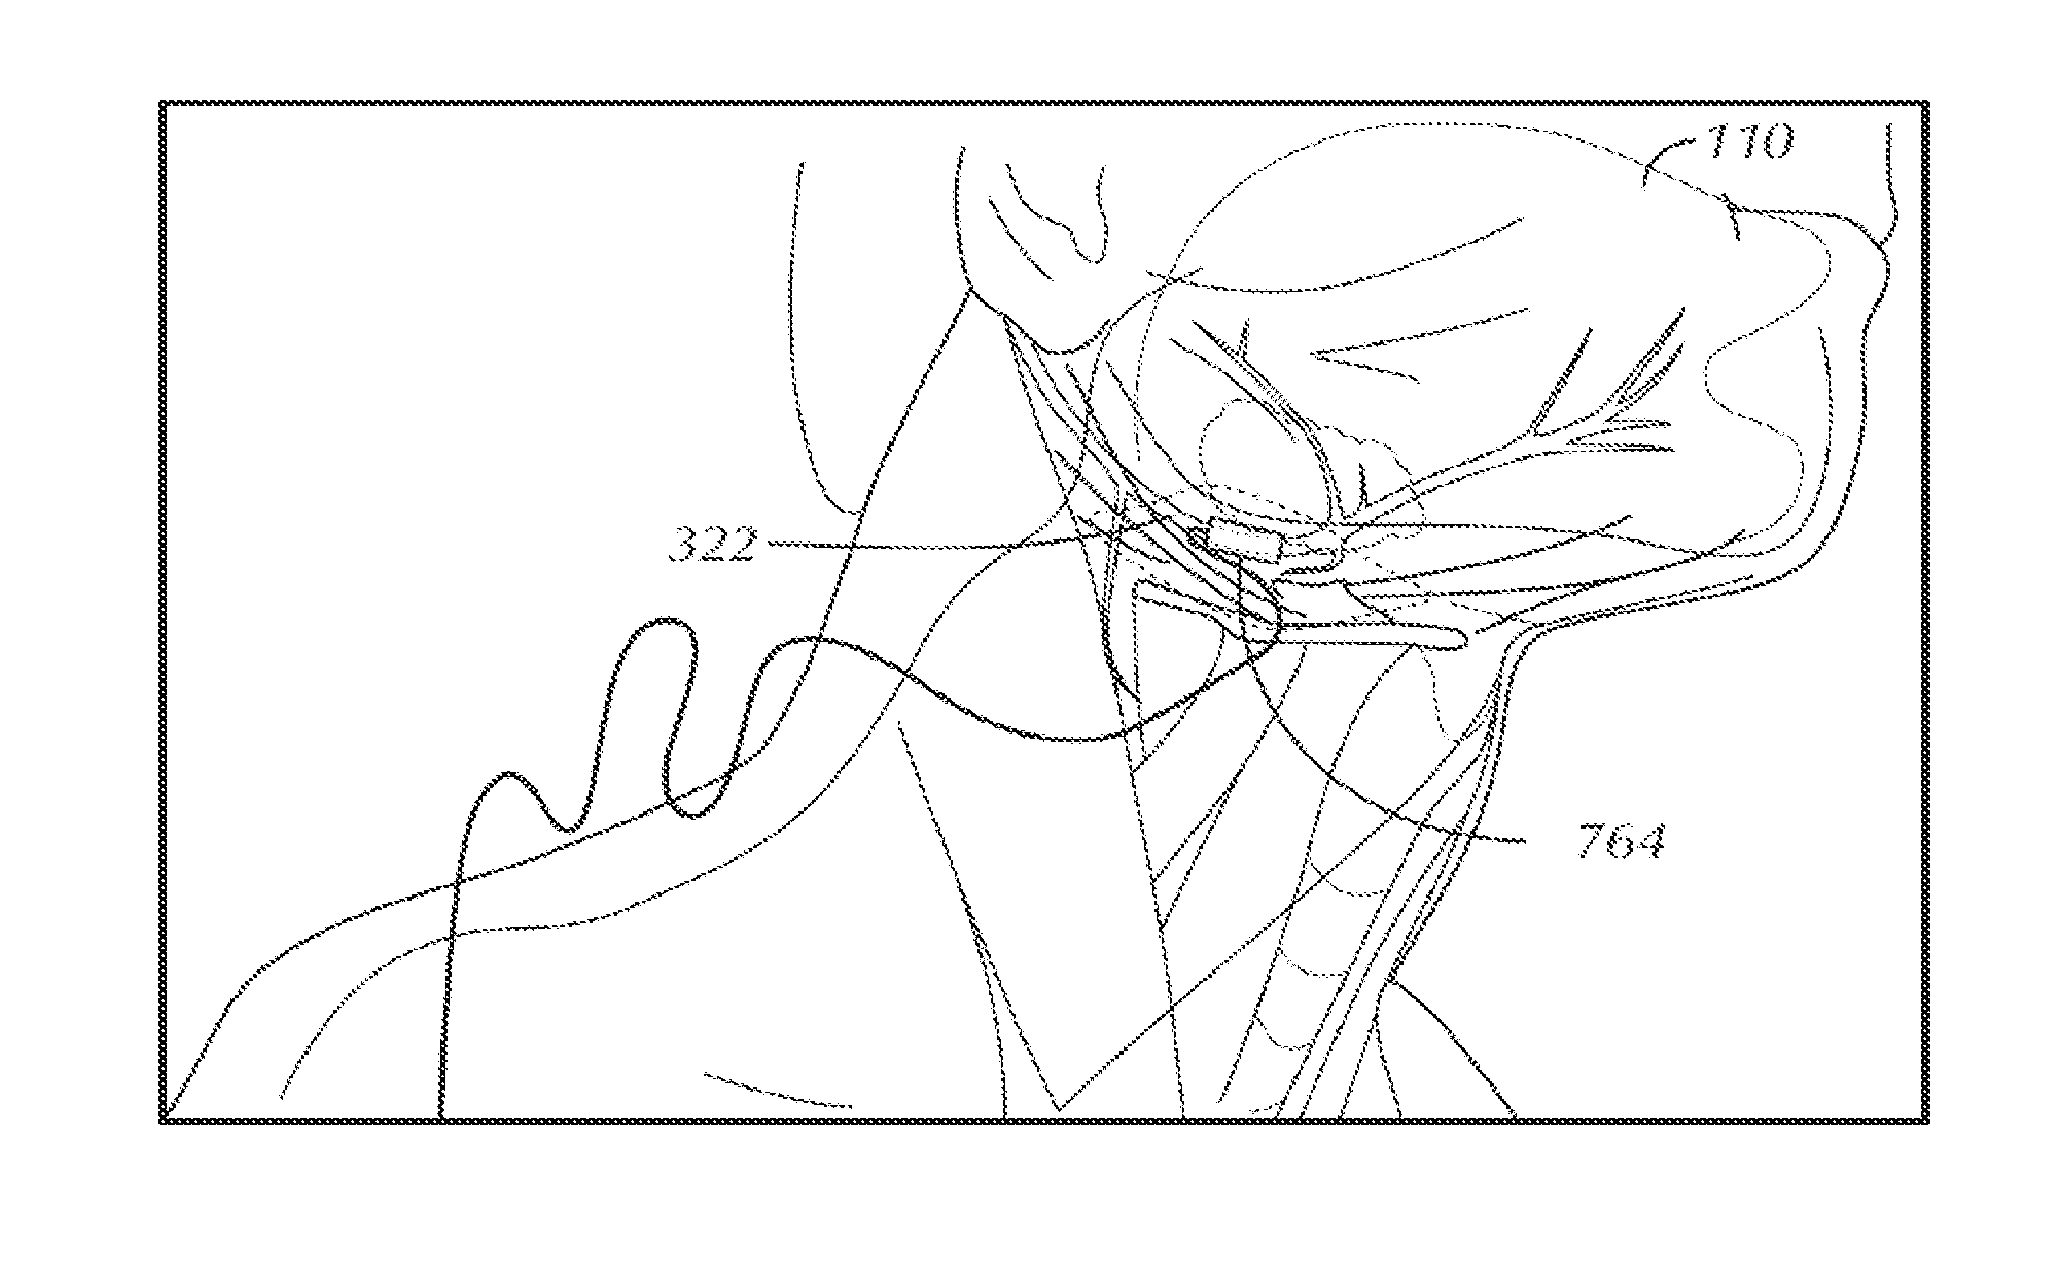 Stimulation of a Hypoglossal Nerve for Controlling the Position of a Patient's Tongue